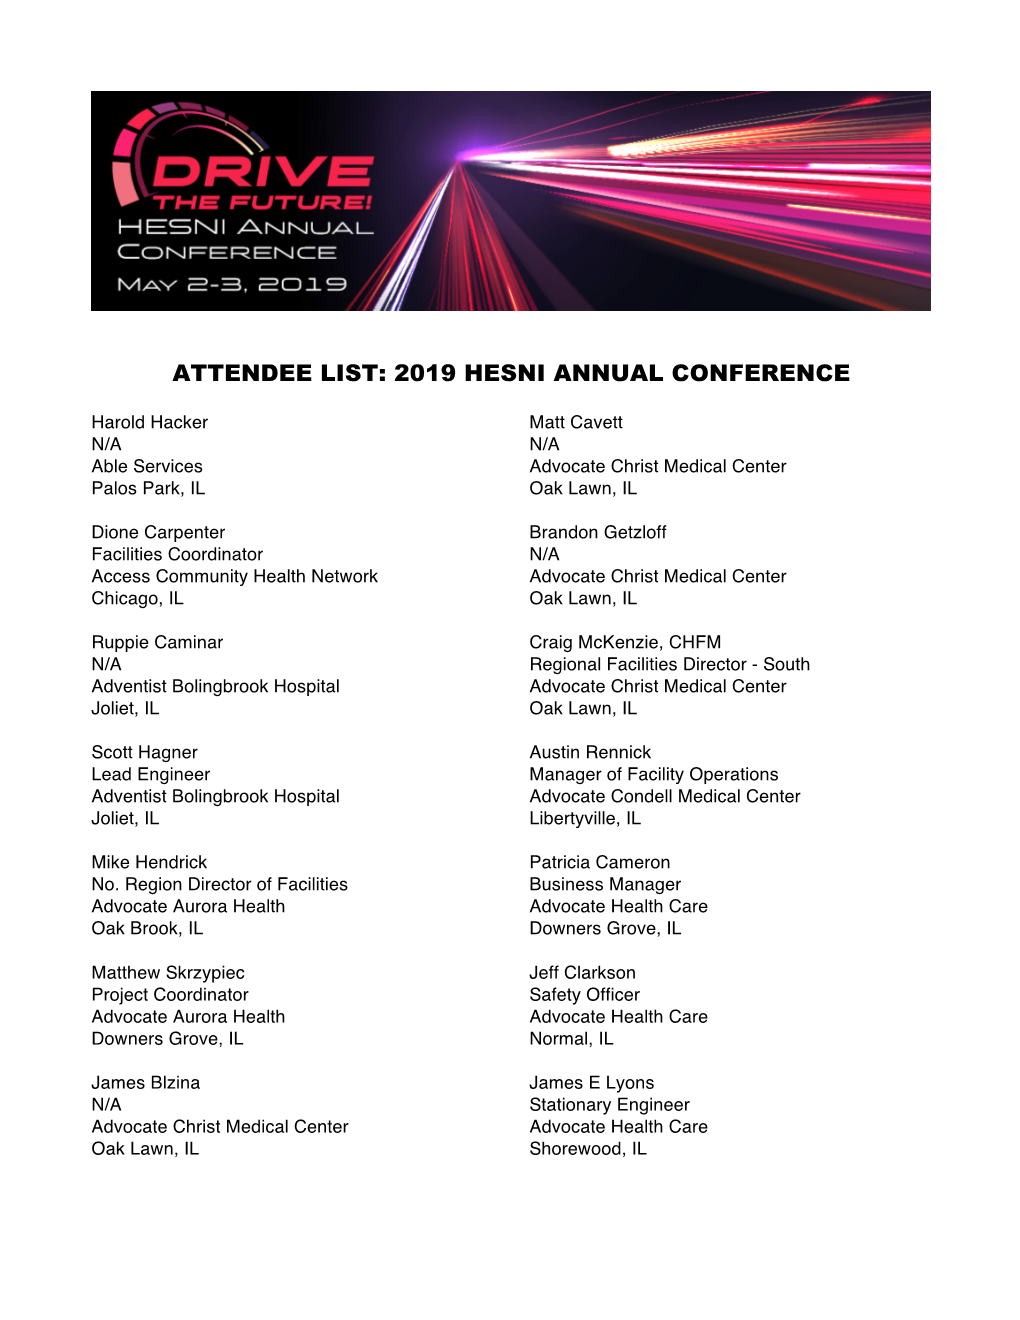 Attendee List: 2019 Hesni Annual Conference